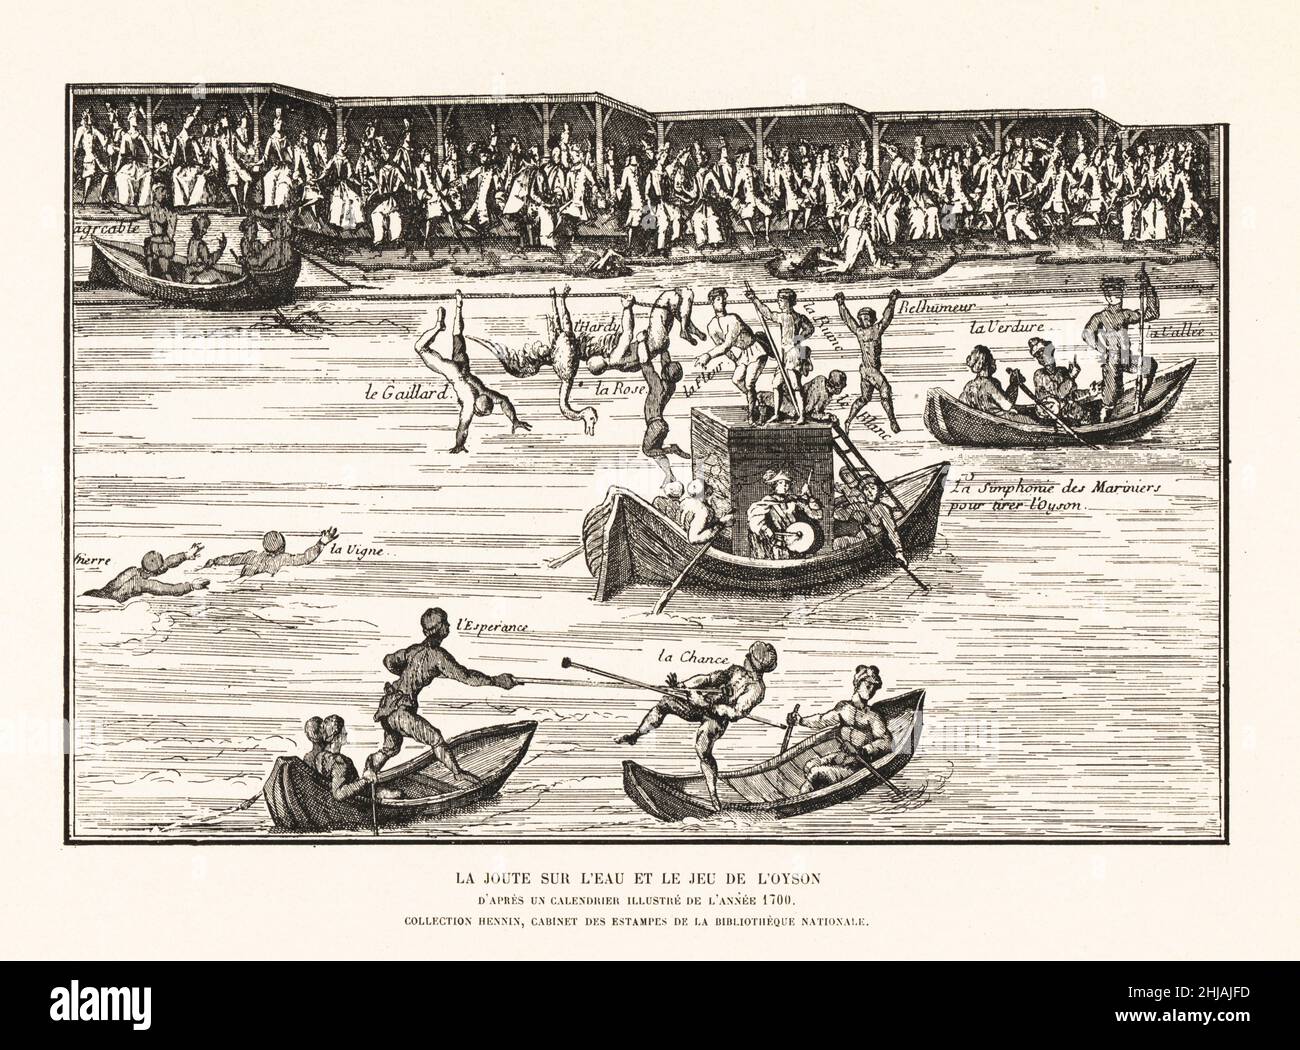 Water games for the Dauphin and his courtiers at a festival on the River Seine, 25 August 1682. Sailors on rowboats joust with poles while a group of men try to grab a goose hanging from a rope. From an illustrated calendar printed in 1700. La joute sur l'eau et le jeu de l'oyson. Lithograph from Henry Rene d’Allemagne’s Recreations et Passe-Temps, Games and Pastimes, Hachette, Paris, 1906. Stock Photo